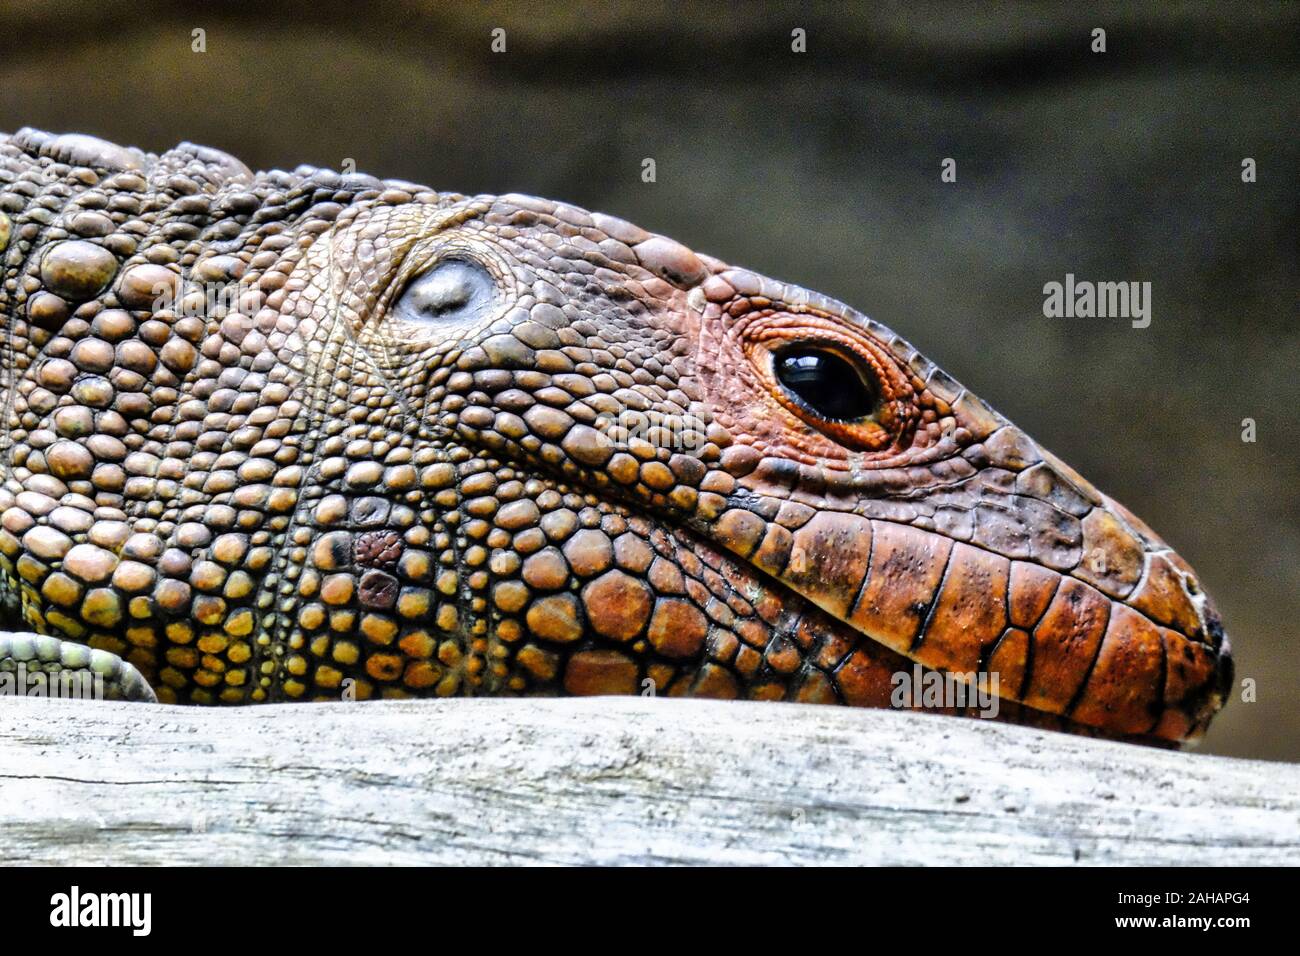 The caiman lizard is a semi-aquatic species named for its large, heavy scales that resemble those of the caiman crocodile. It has a green body and a r Stock Photo